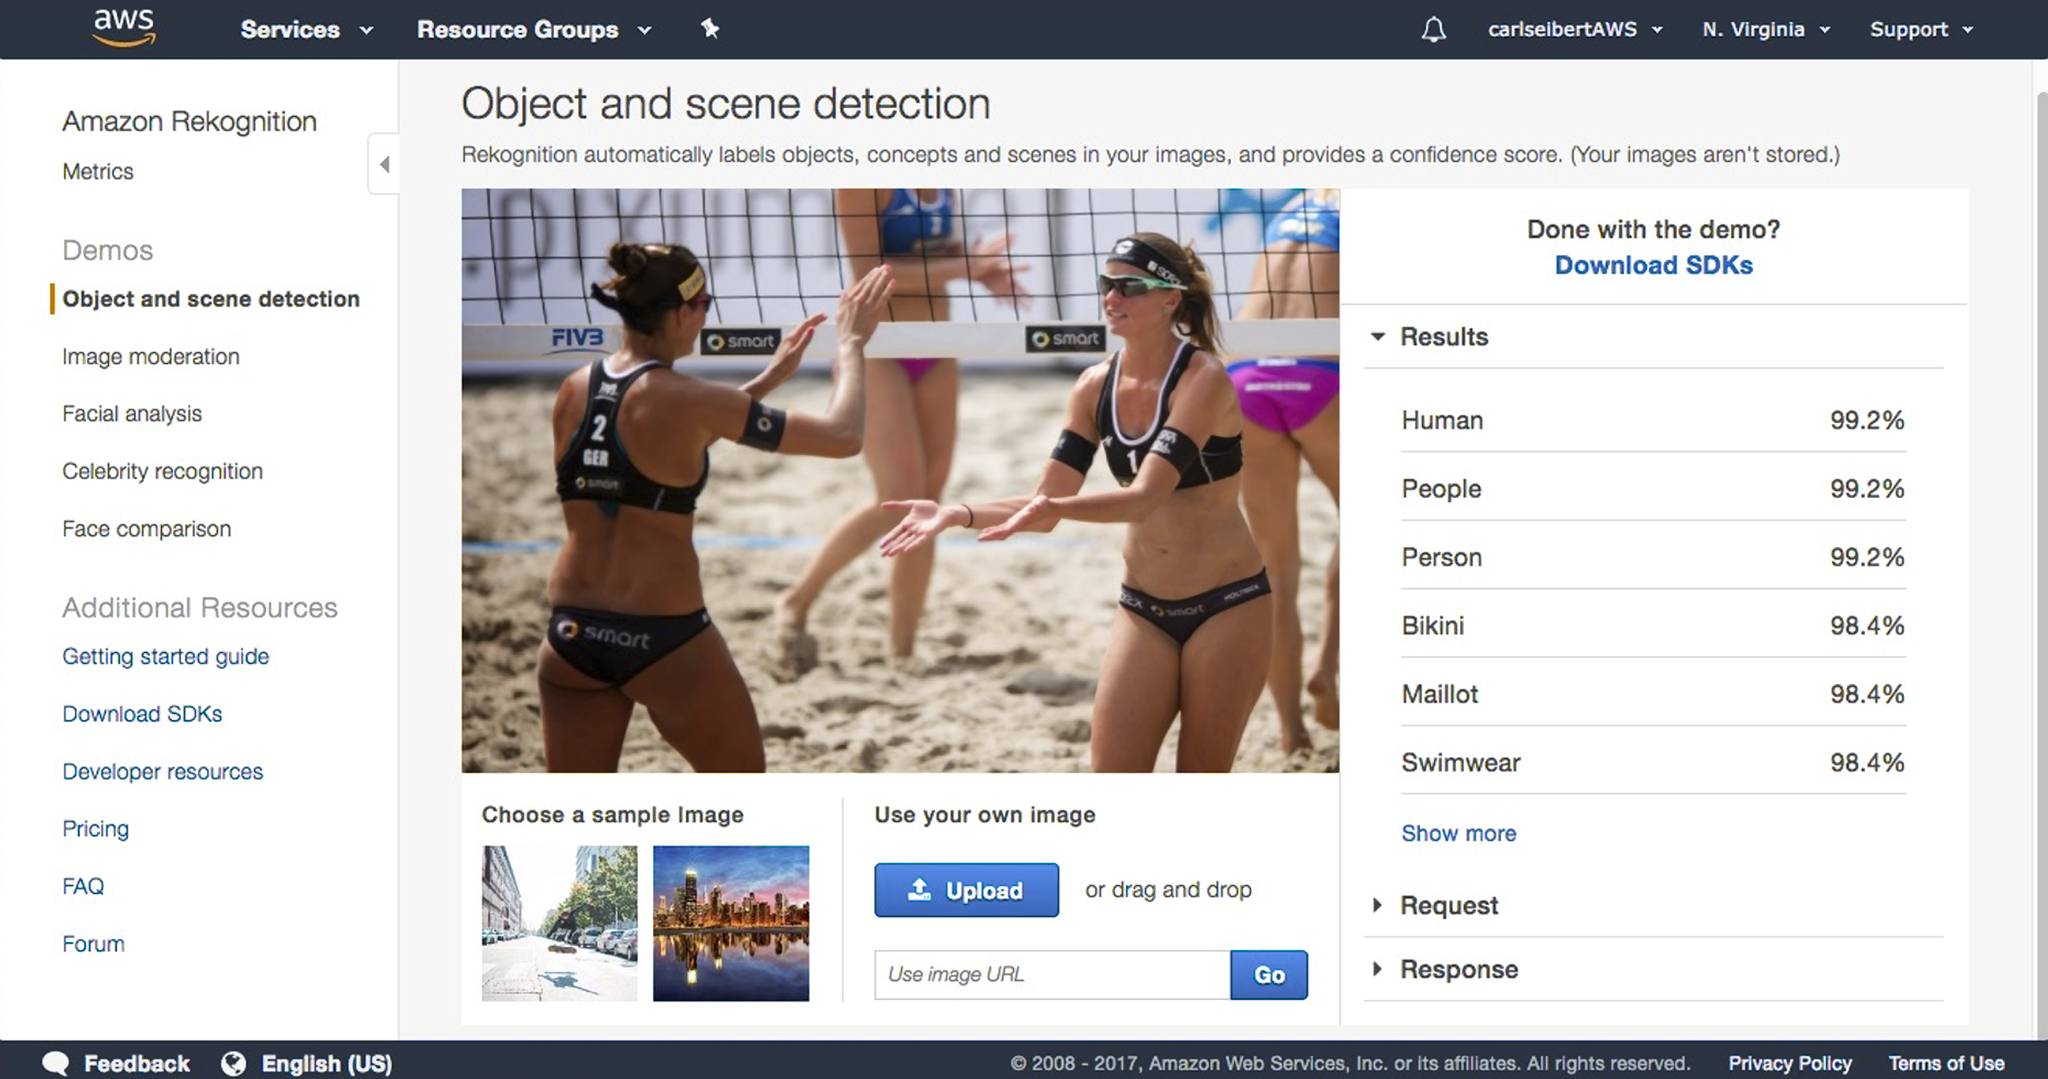 Amazon's Rekognition AI image recognition did reasonably well on this picture.